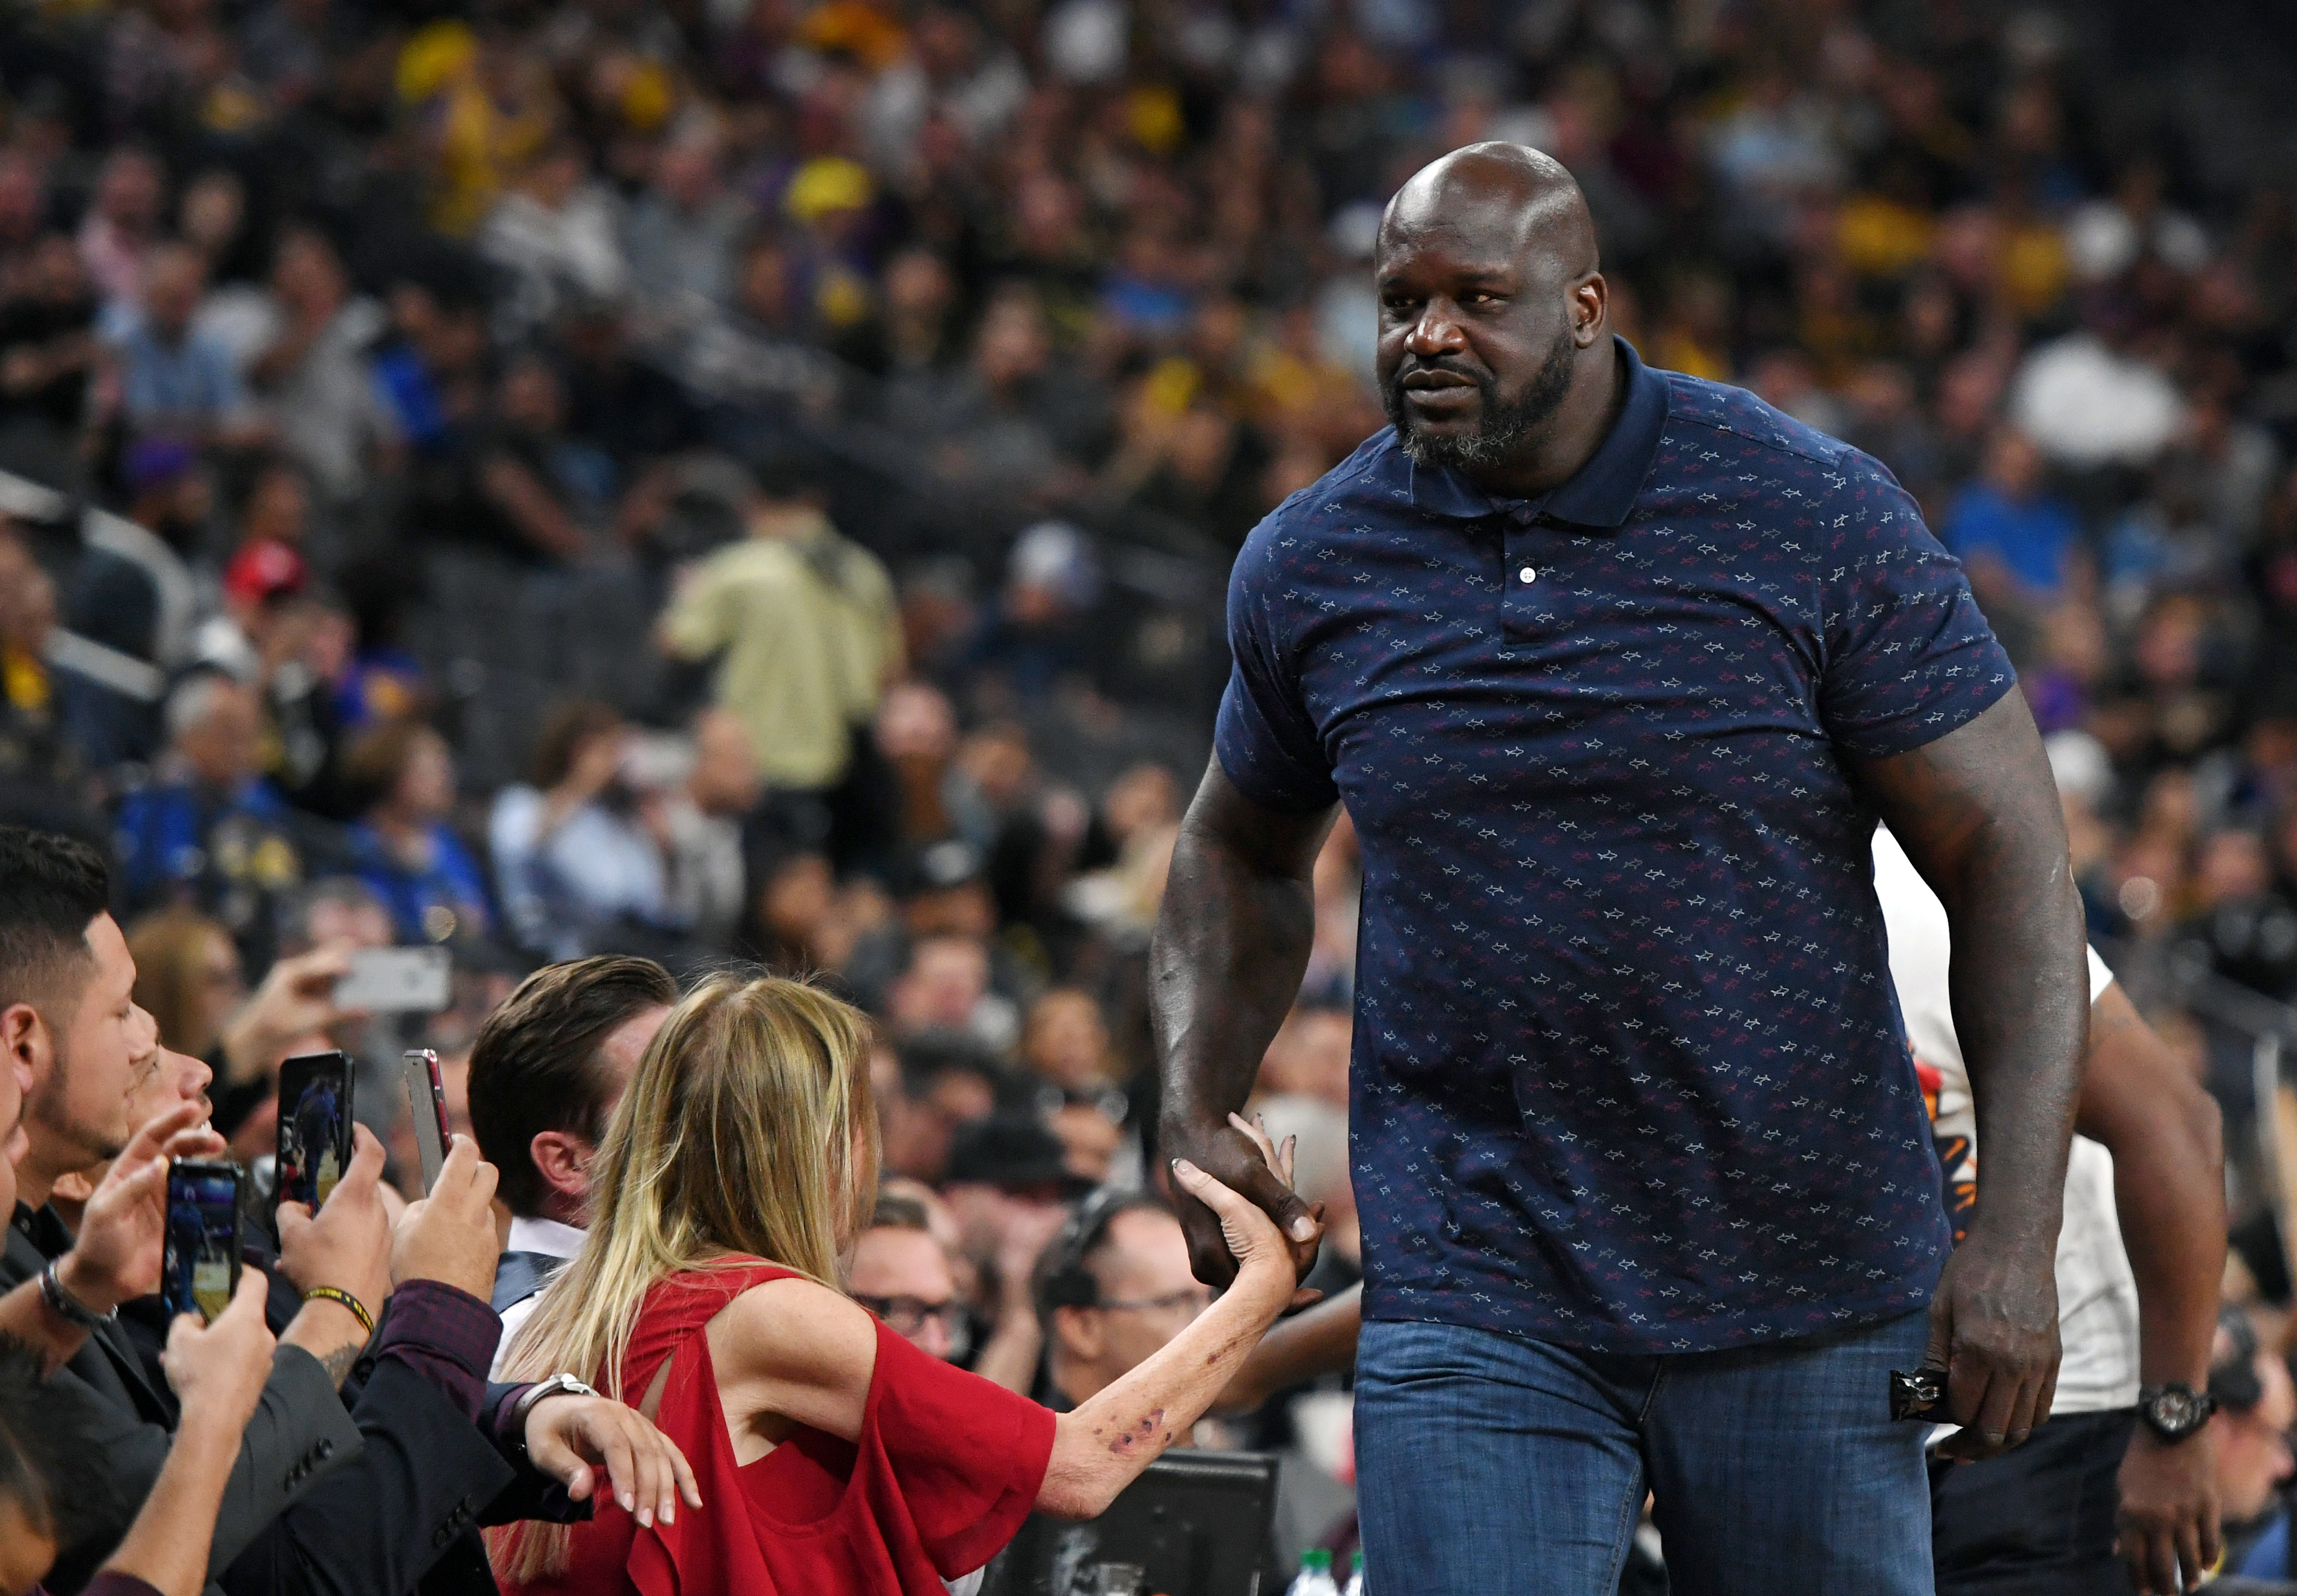 Shaquille O'Neal understands now why his trophies would always disappear.